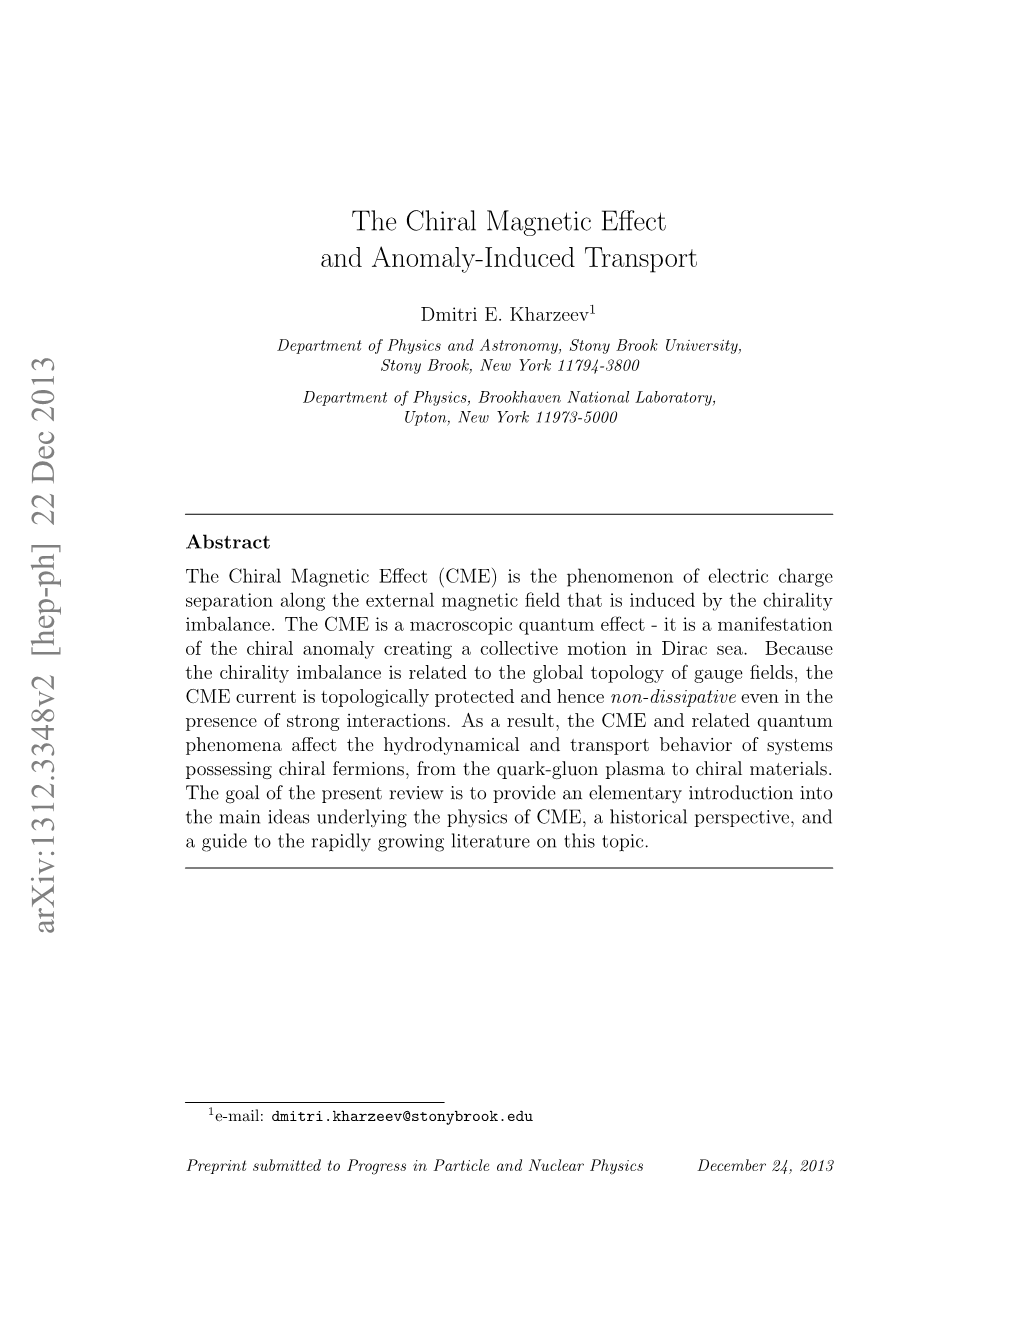 The Chiral Magnetic Effect and Anomaly-Induced Transport